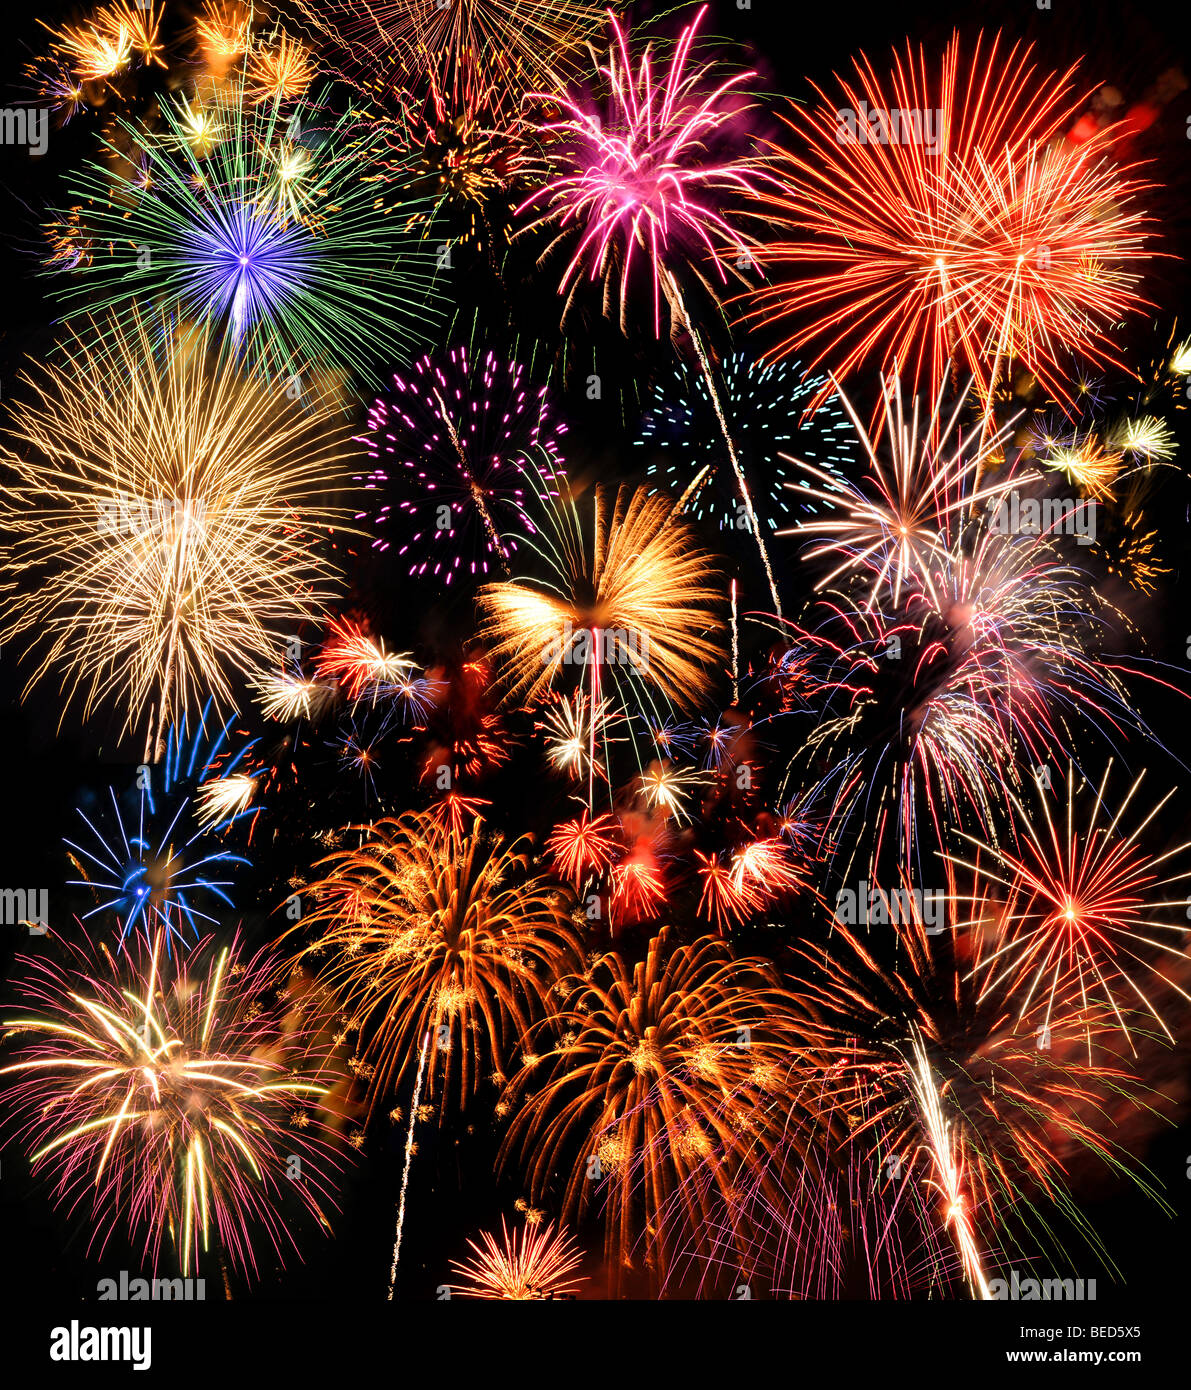 Colorful fireworks over a night sky Stock Photo